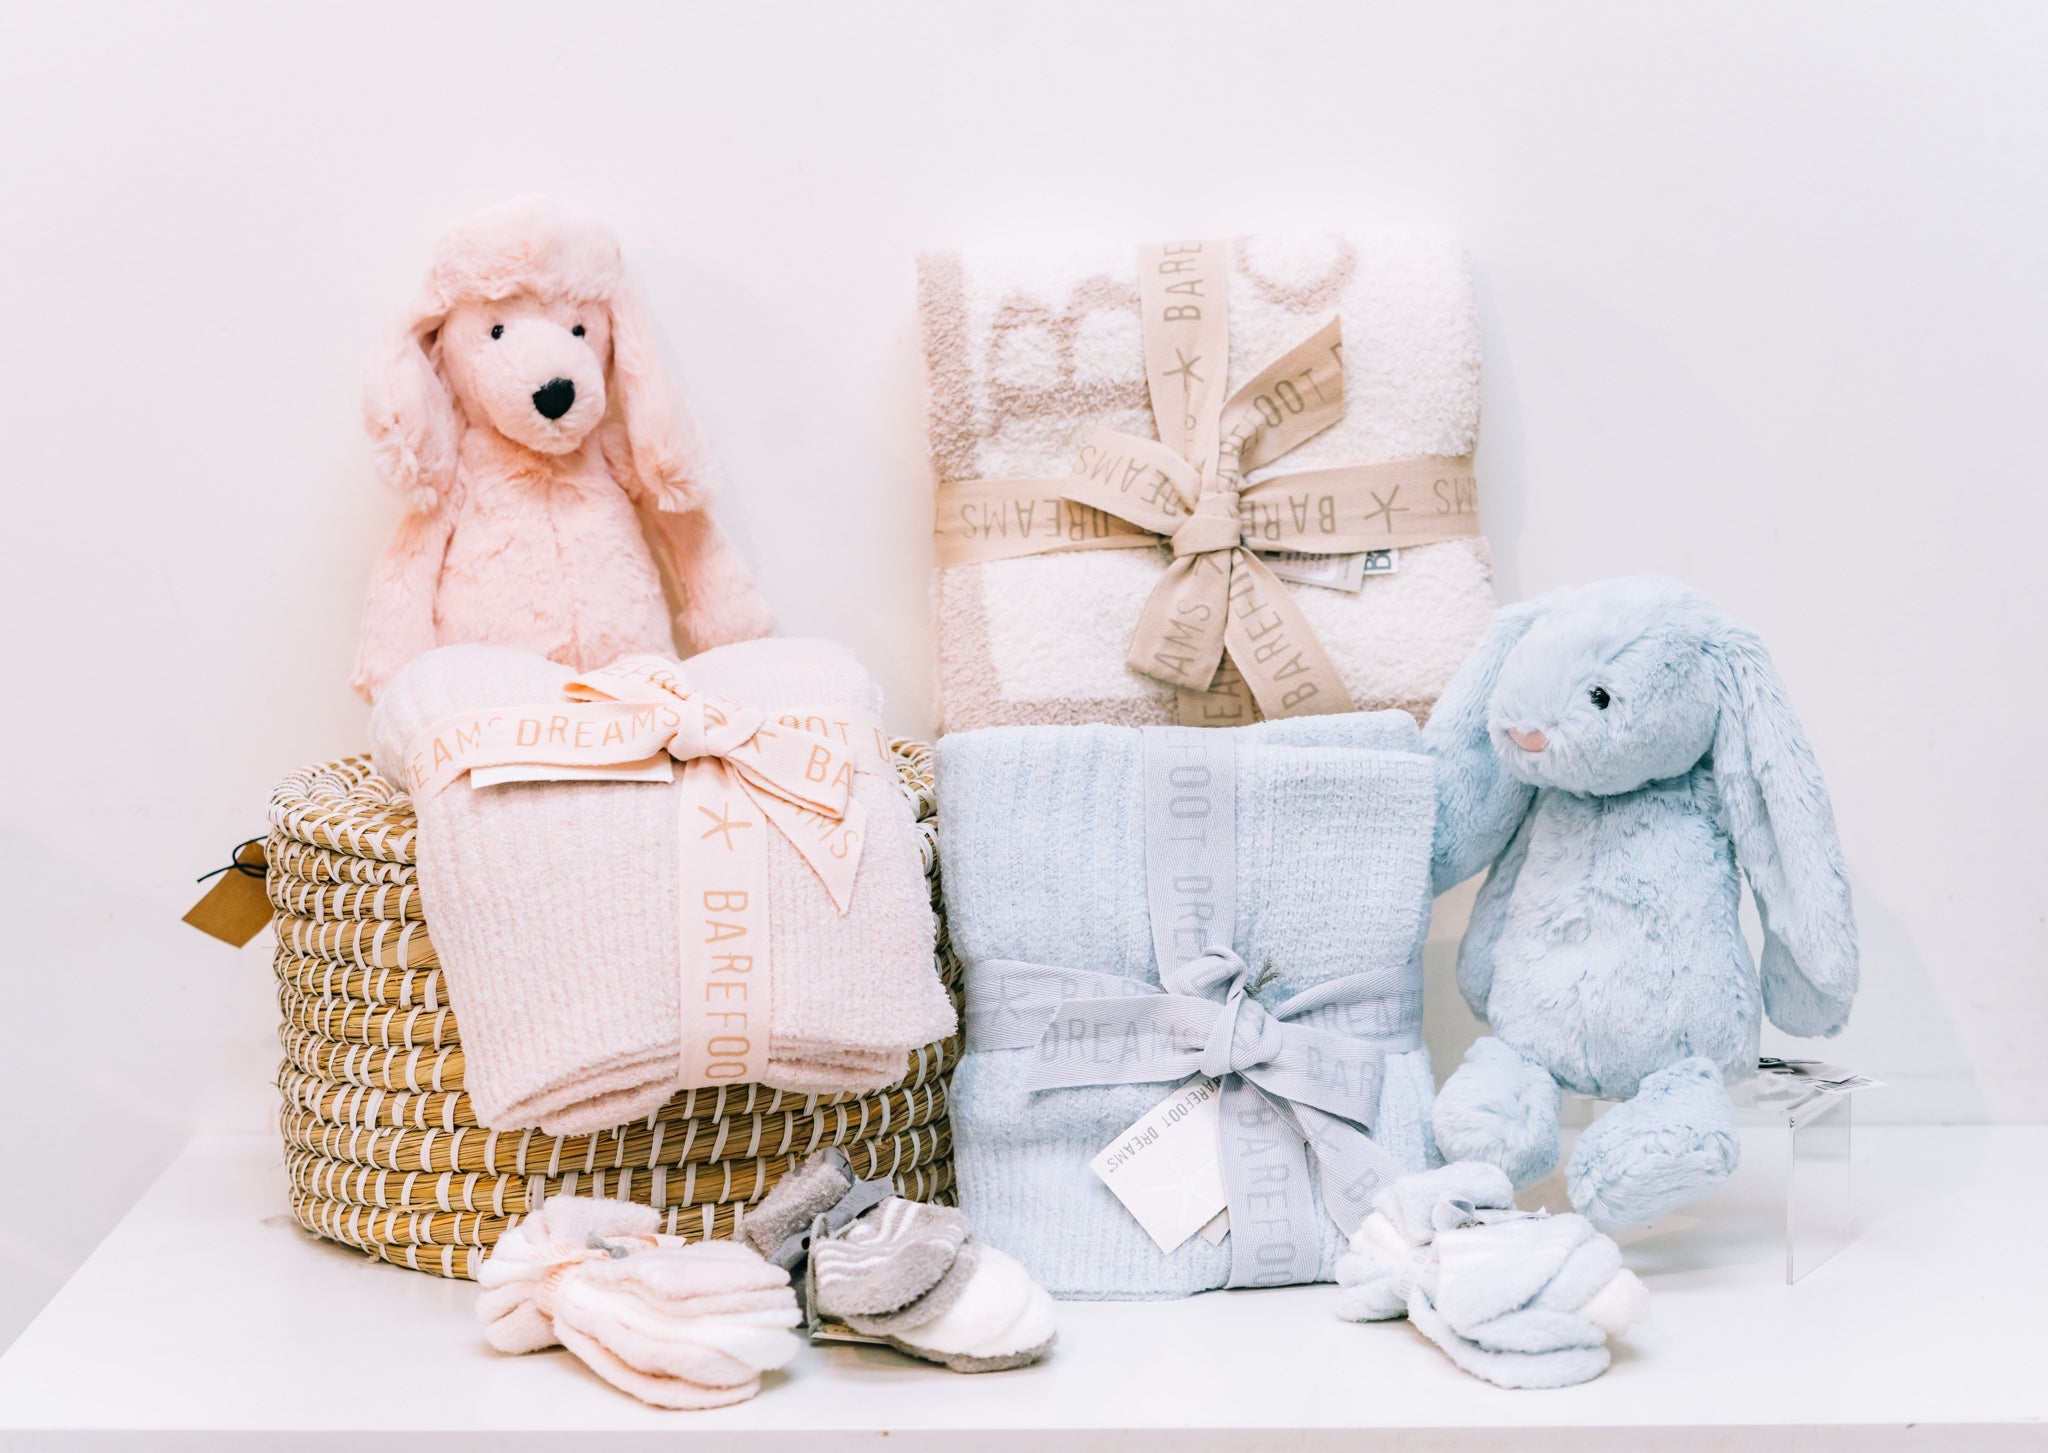 Barefoot Dreams - Shopping Online in Baby Square